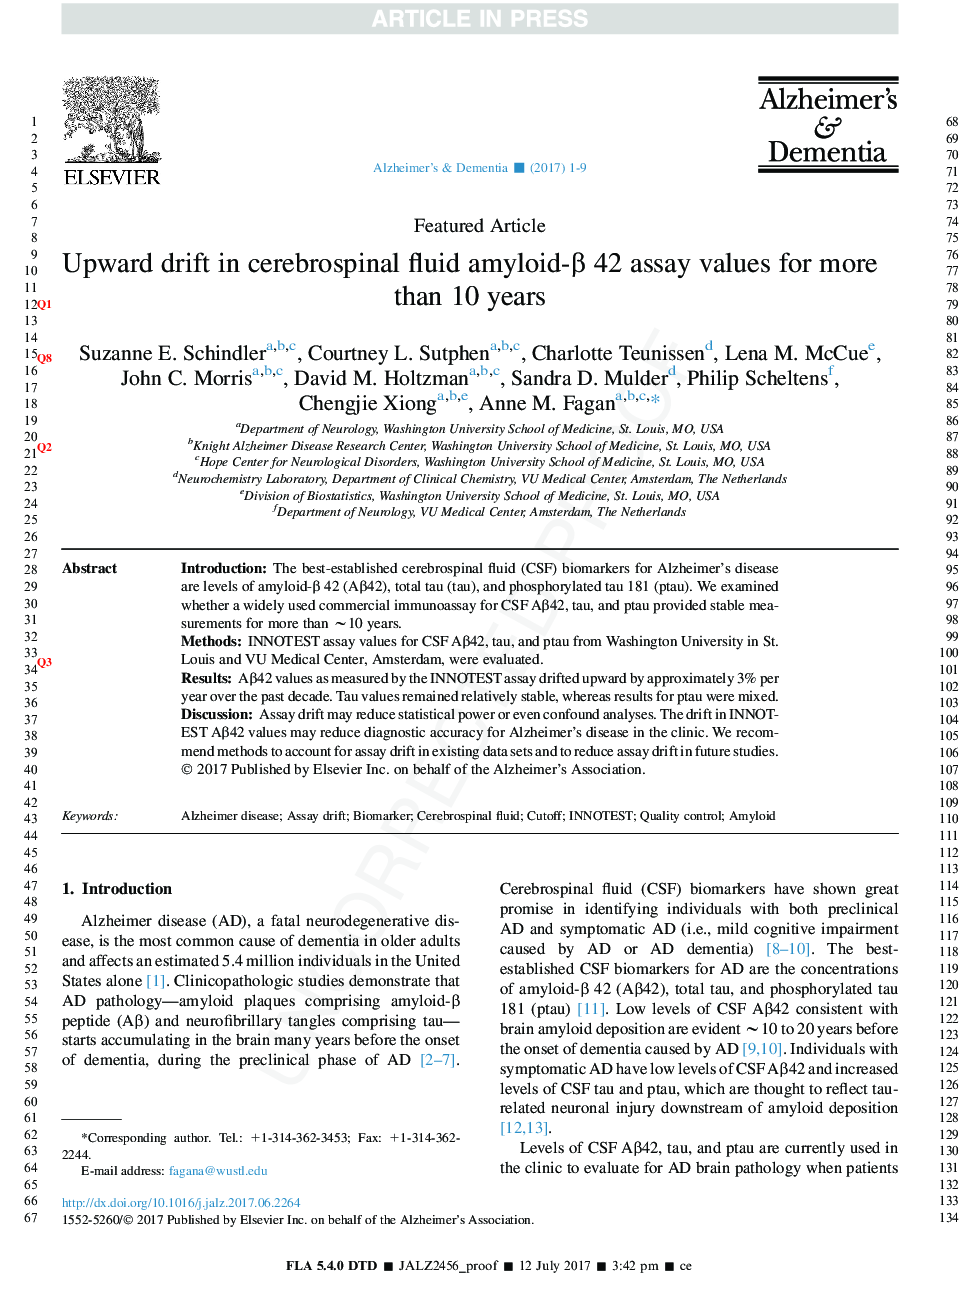 Upward drift in cerebrospinal fluid amyloid Î² 42 assay values for more than 10Â years